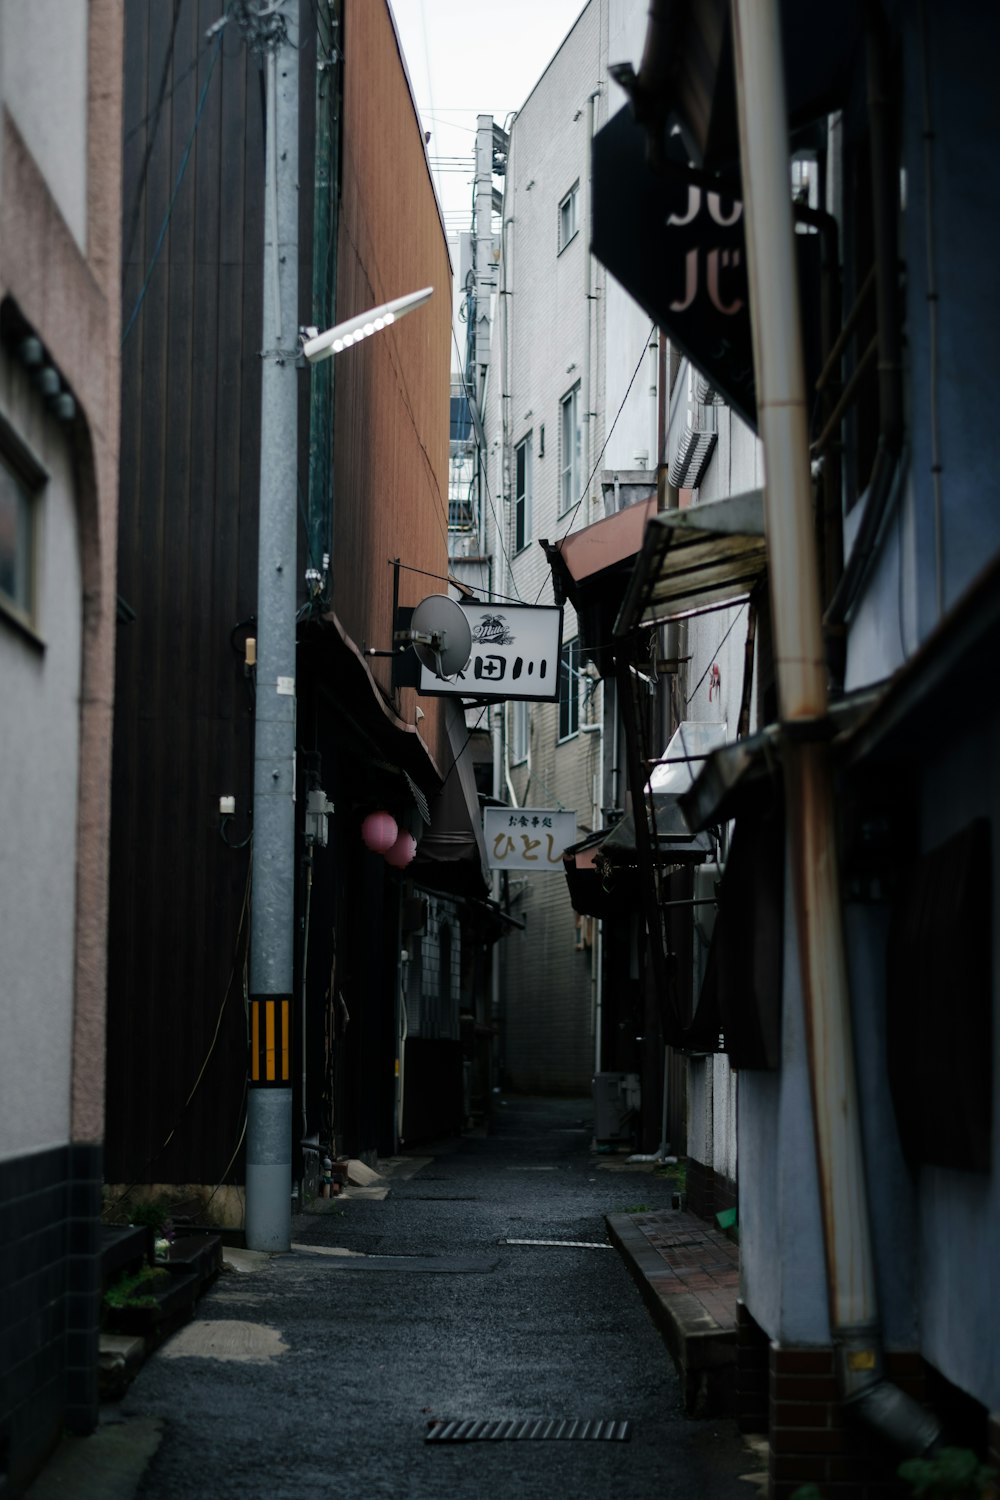 a narrow alley way with buildings and signs